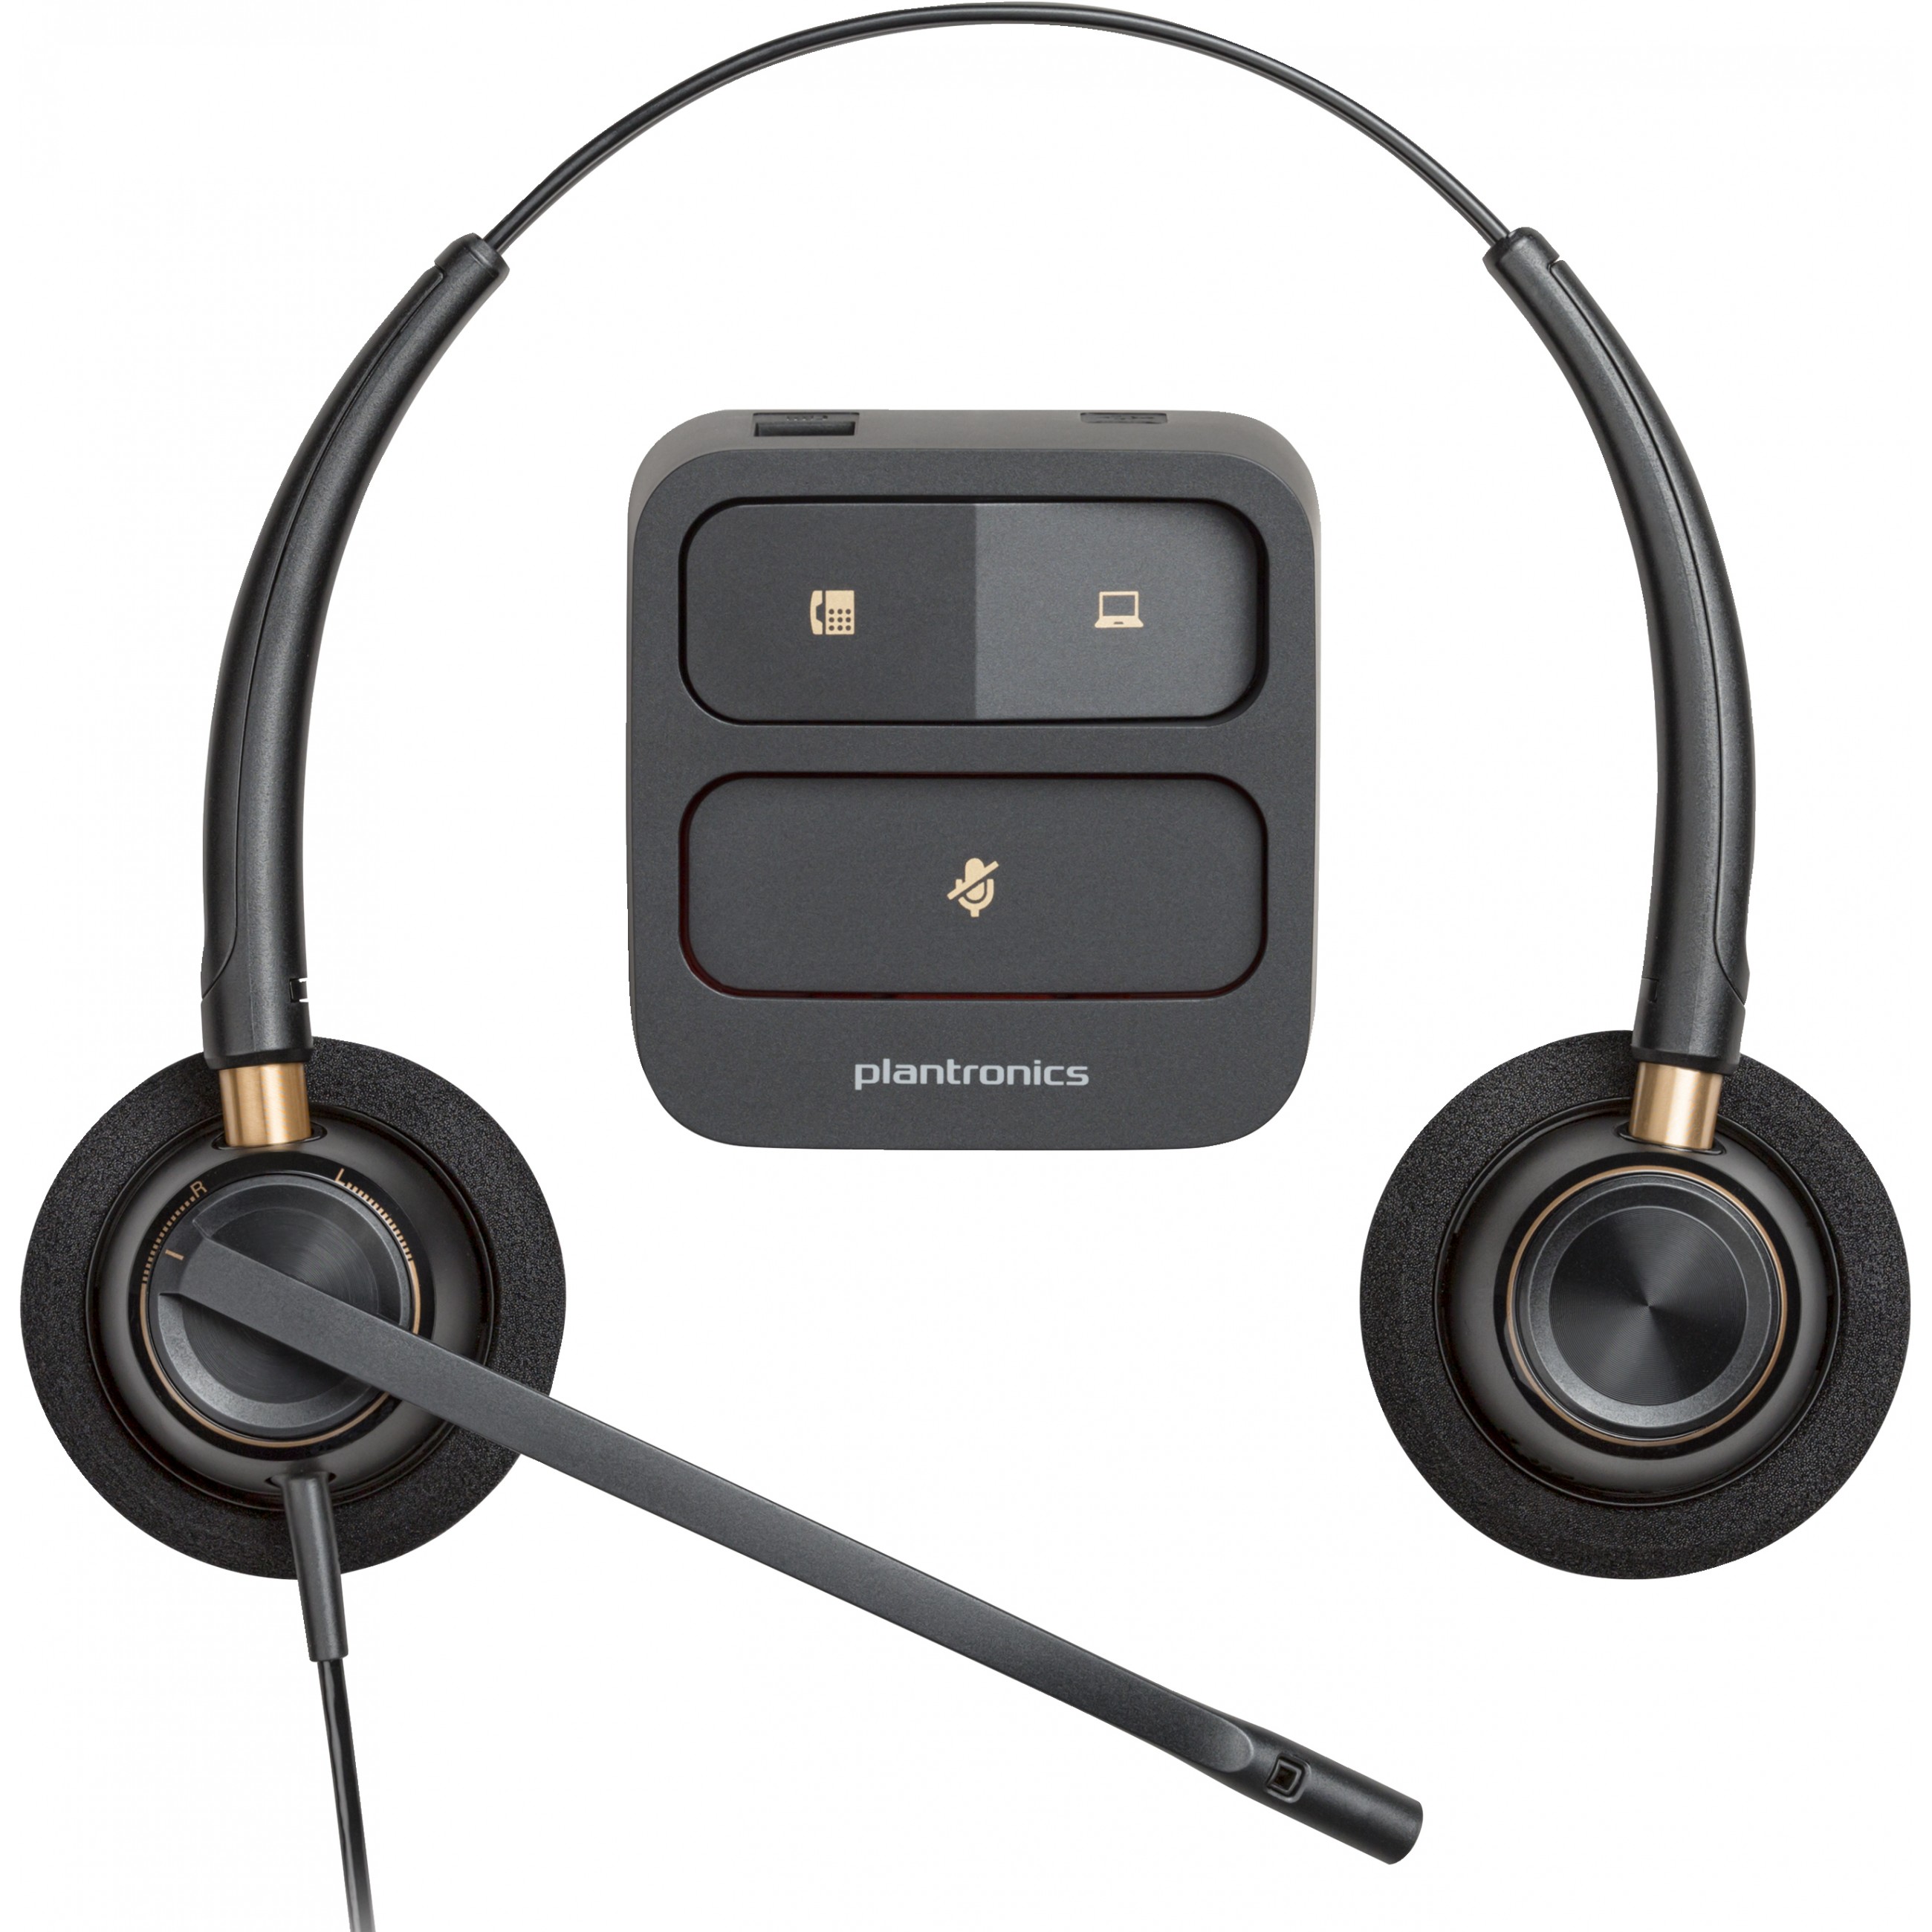 POLY EncorePro 520 Binaural Headset +Quick Disconnect